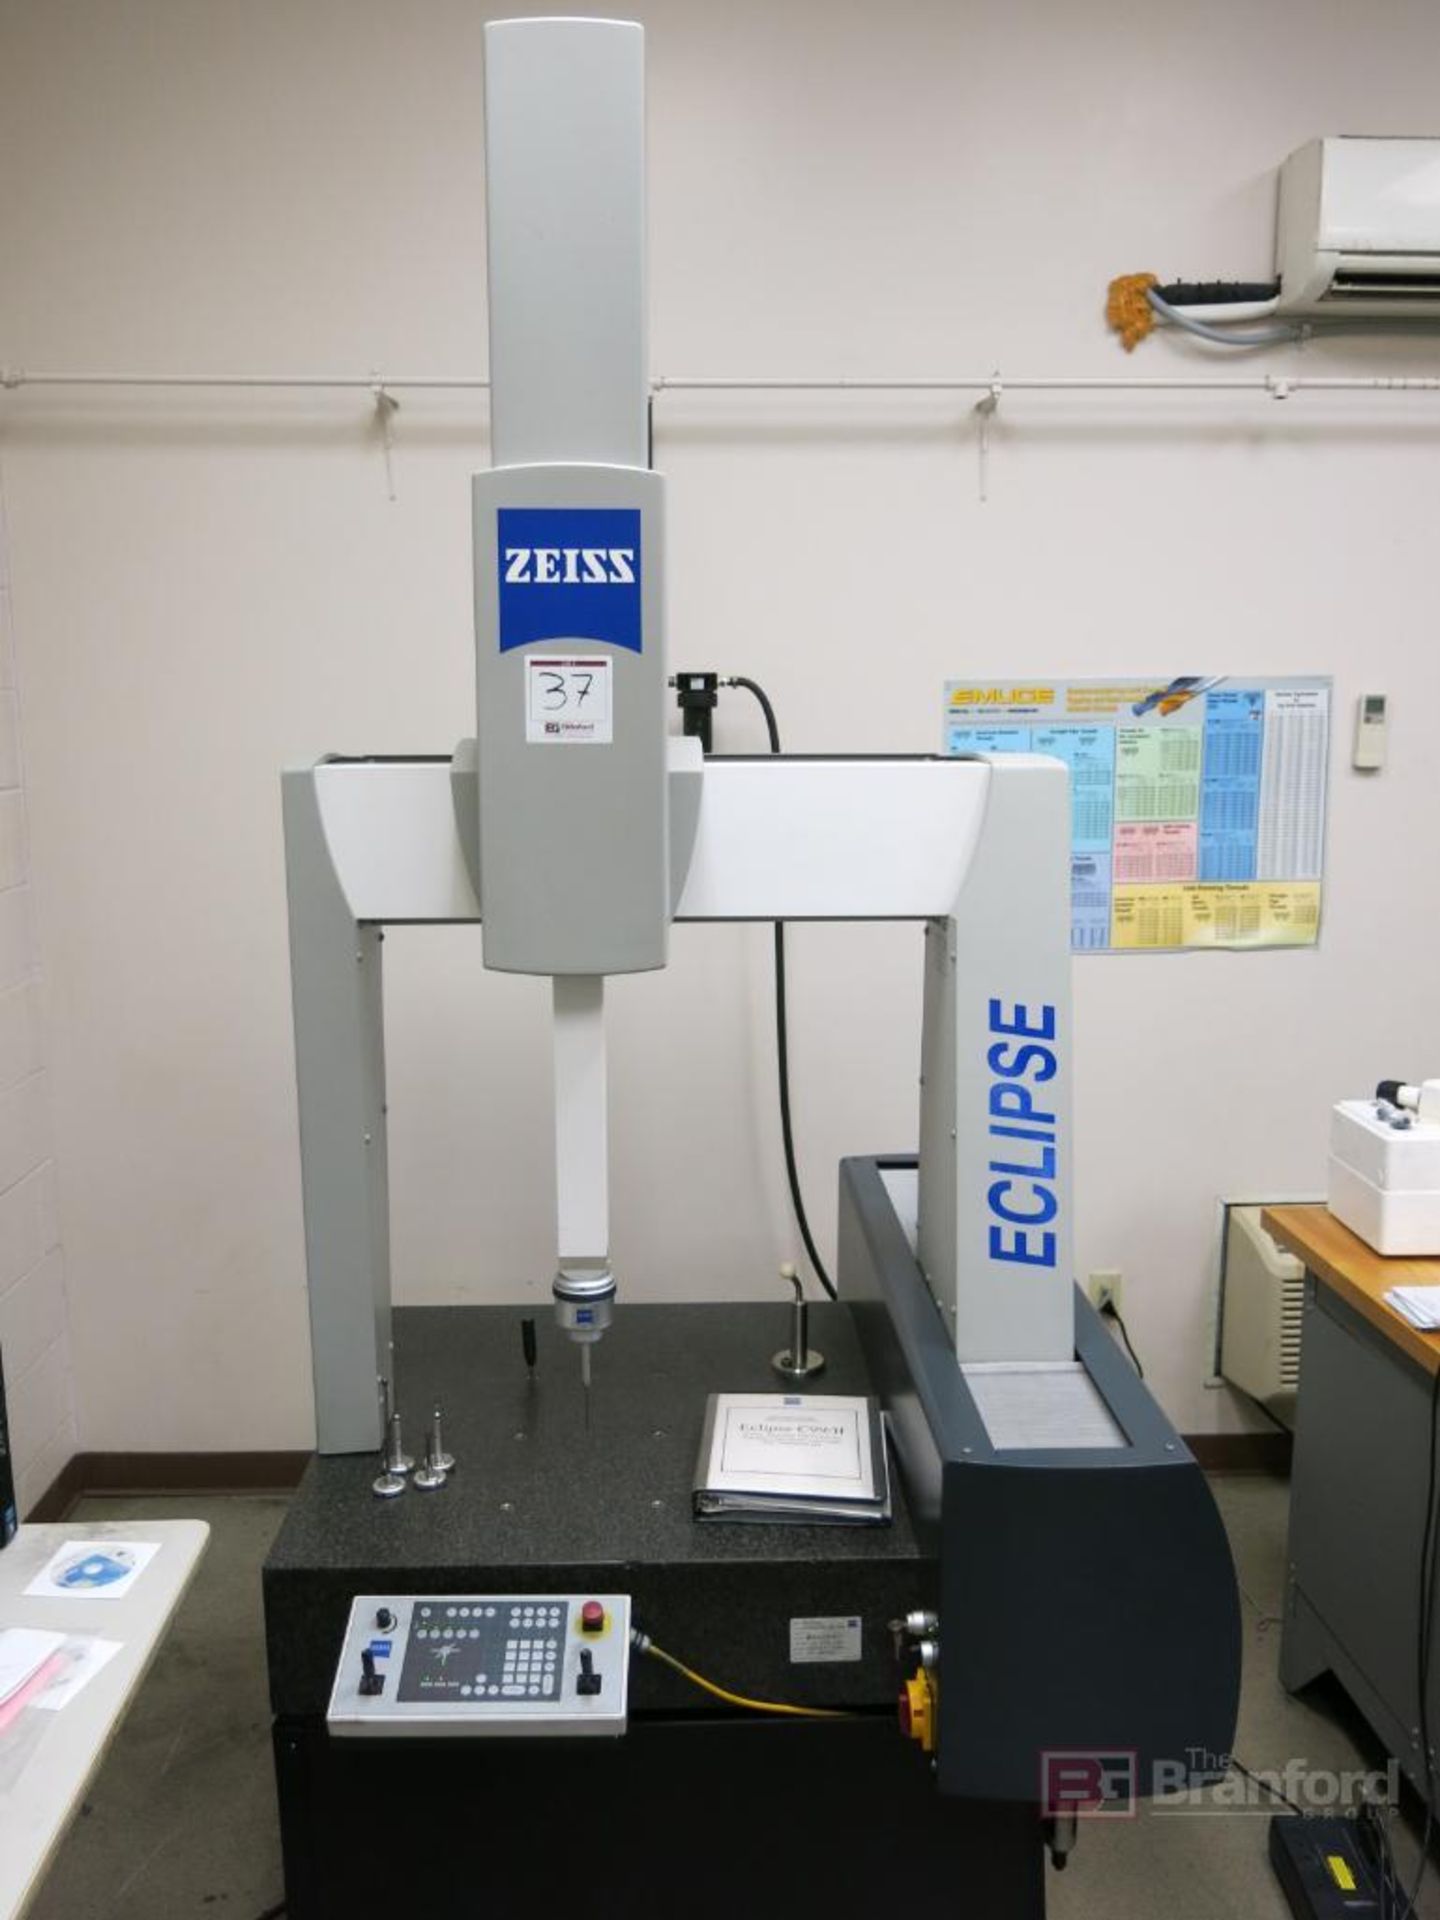 Zeiss Eclipse Model SYS: EC, 550 DOC, TS, 099/II Coordinate Measuring Machine - Image 2 of 8